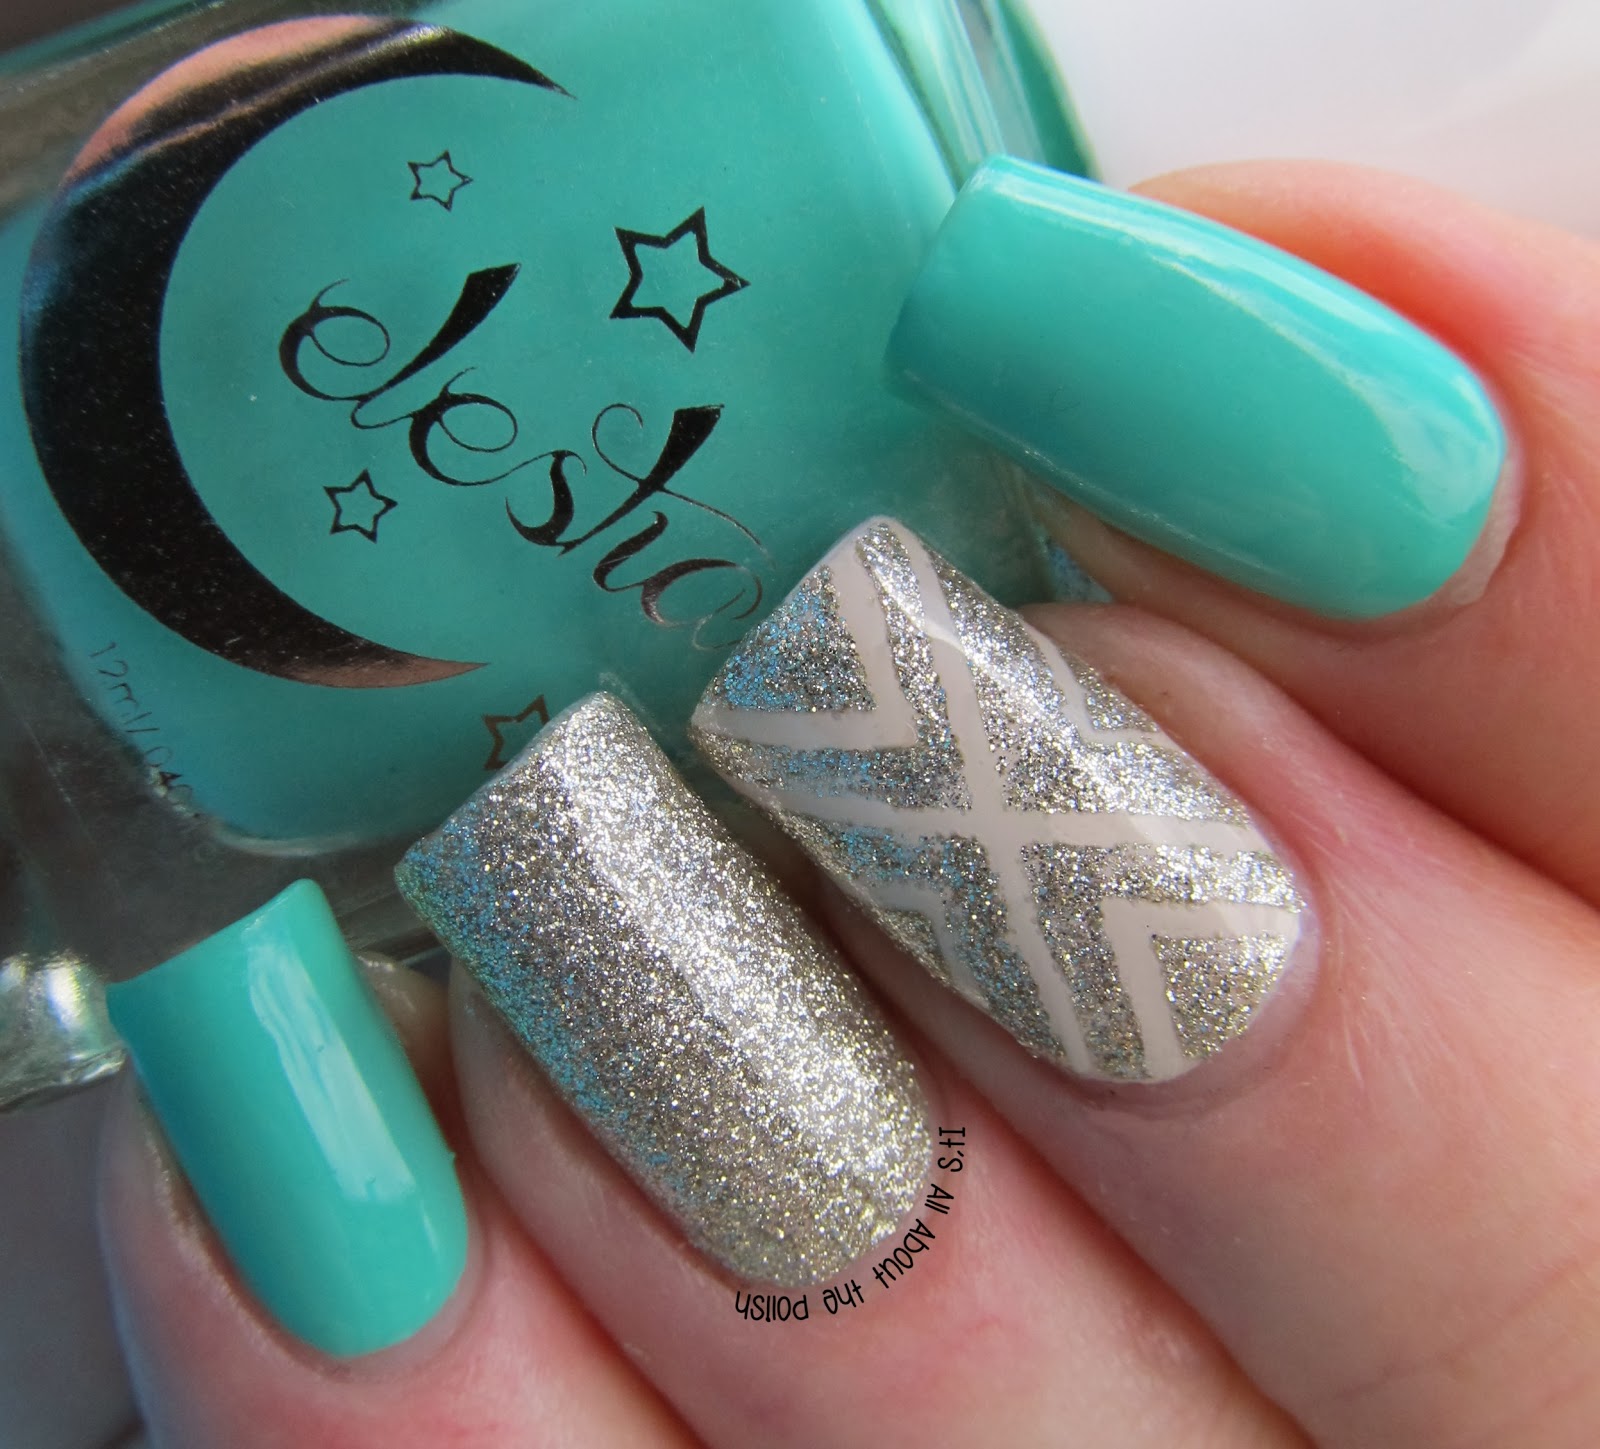 It's all about the polish: X Nail Glitter Design